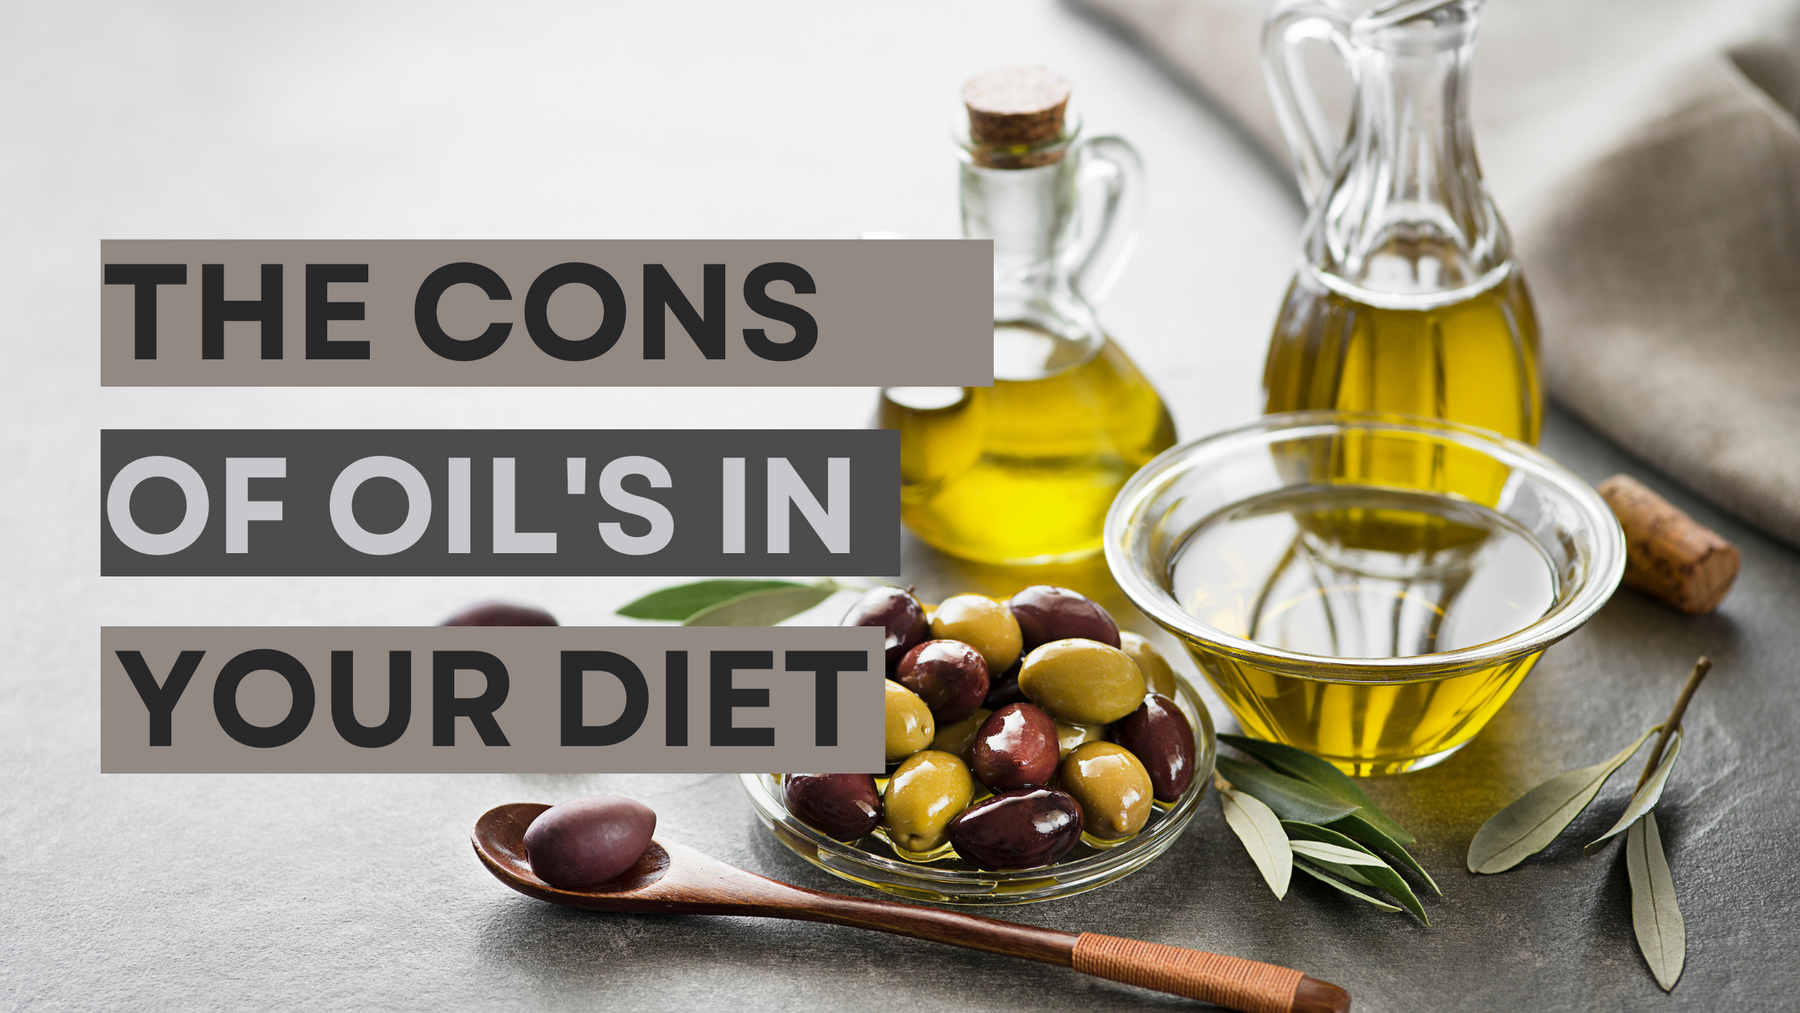 The cons of oil in your food...